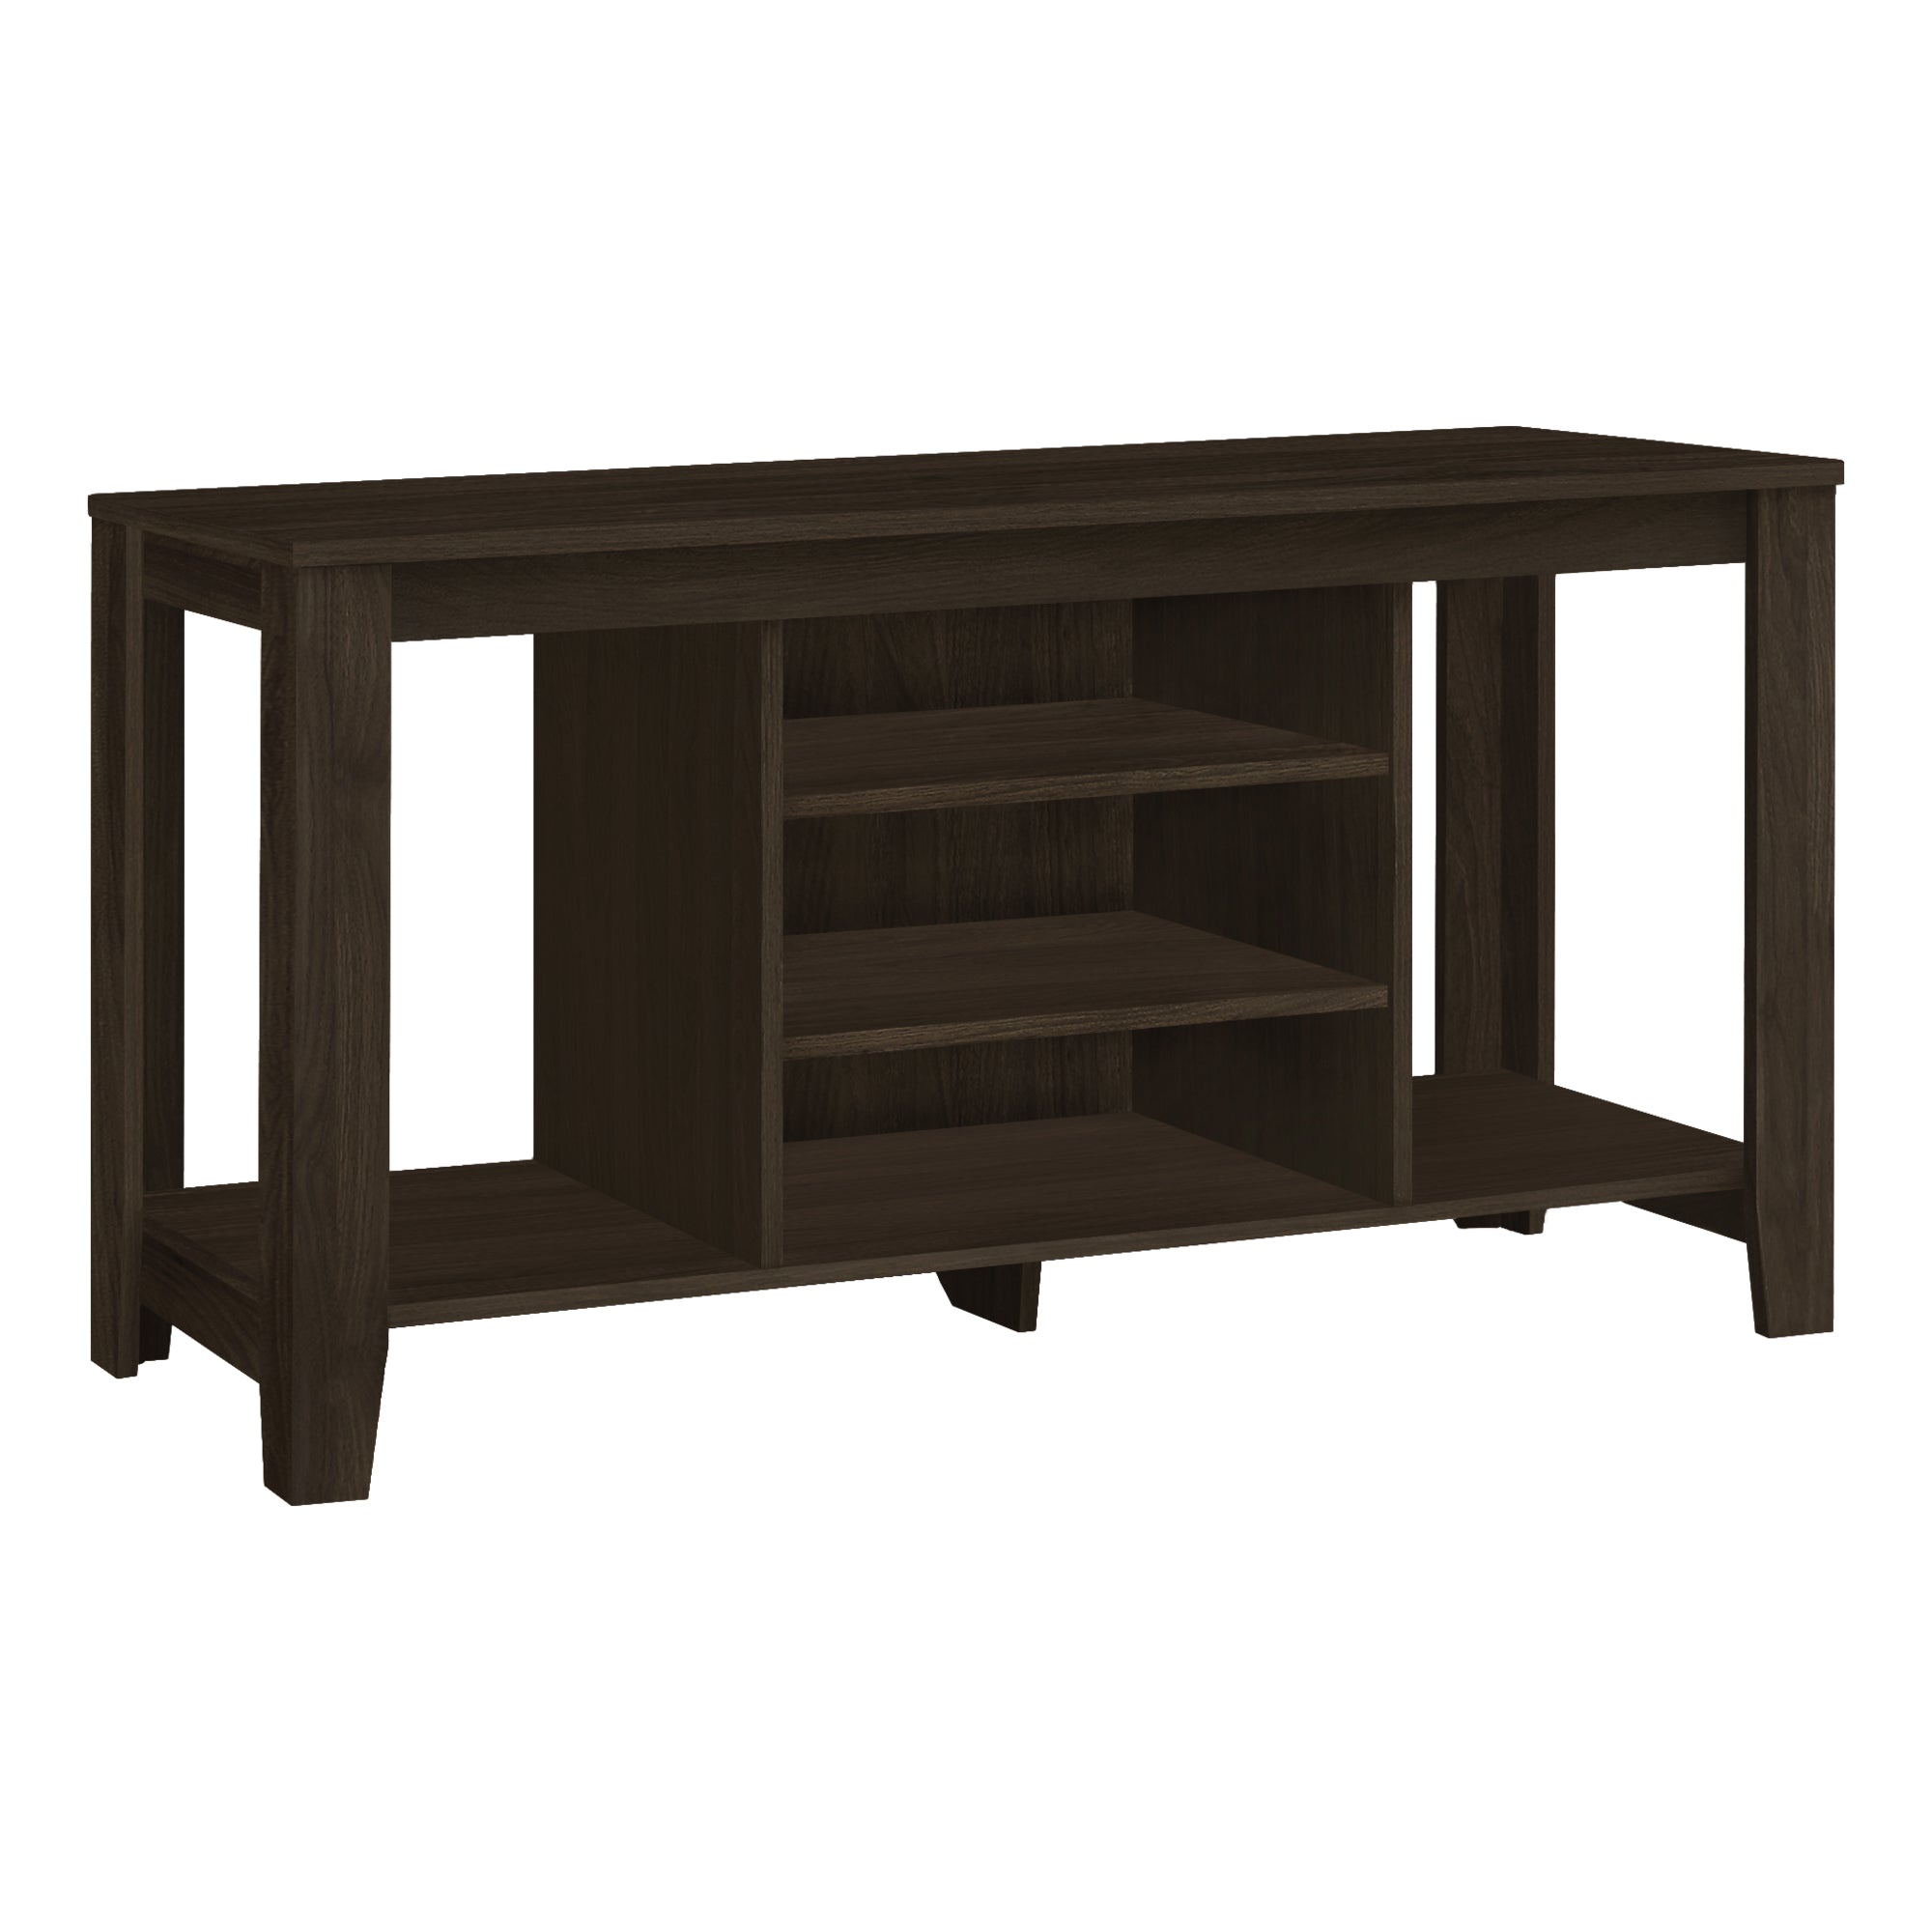 MN-223529    Tv Stand, 48 Inch, Console, Media Entertainment Center, Storage Cabinet, Living Room, Bedroom, Laminate, Dark Brown, Contemporary, Modern